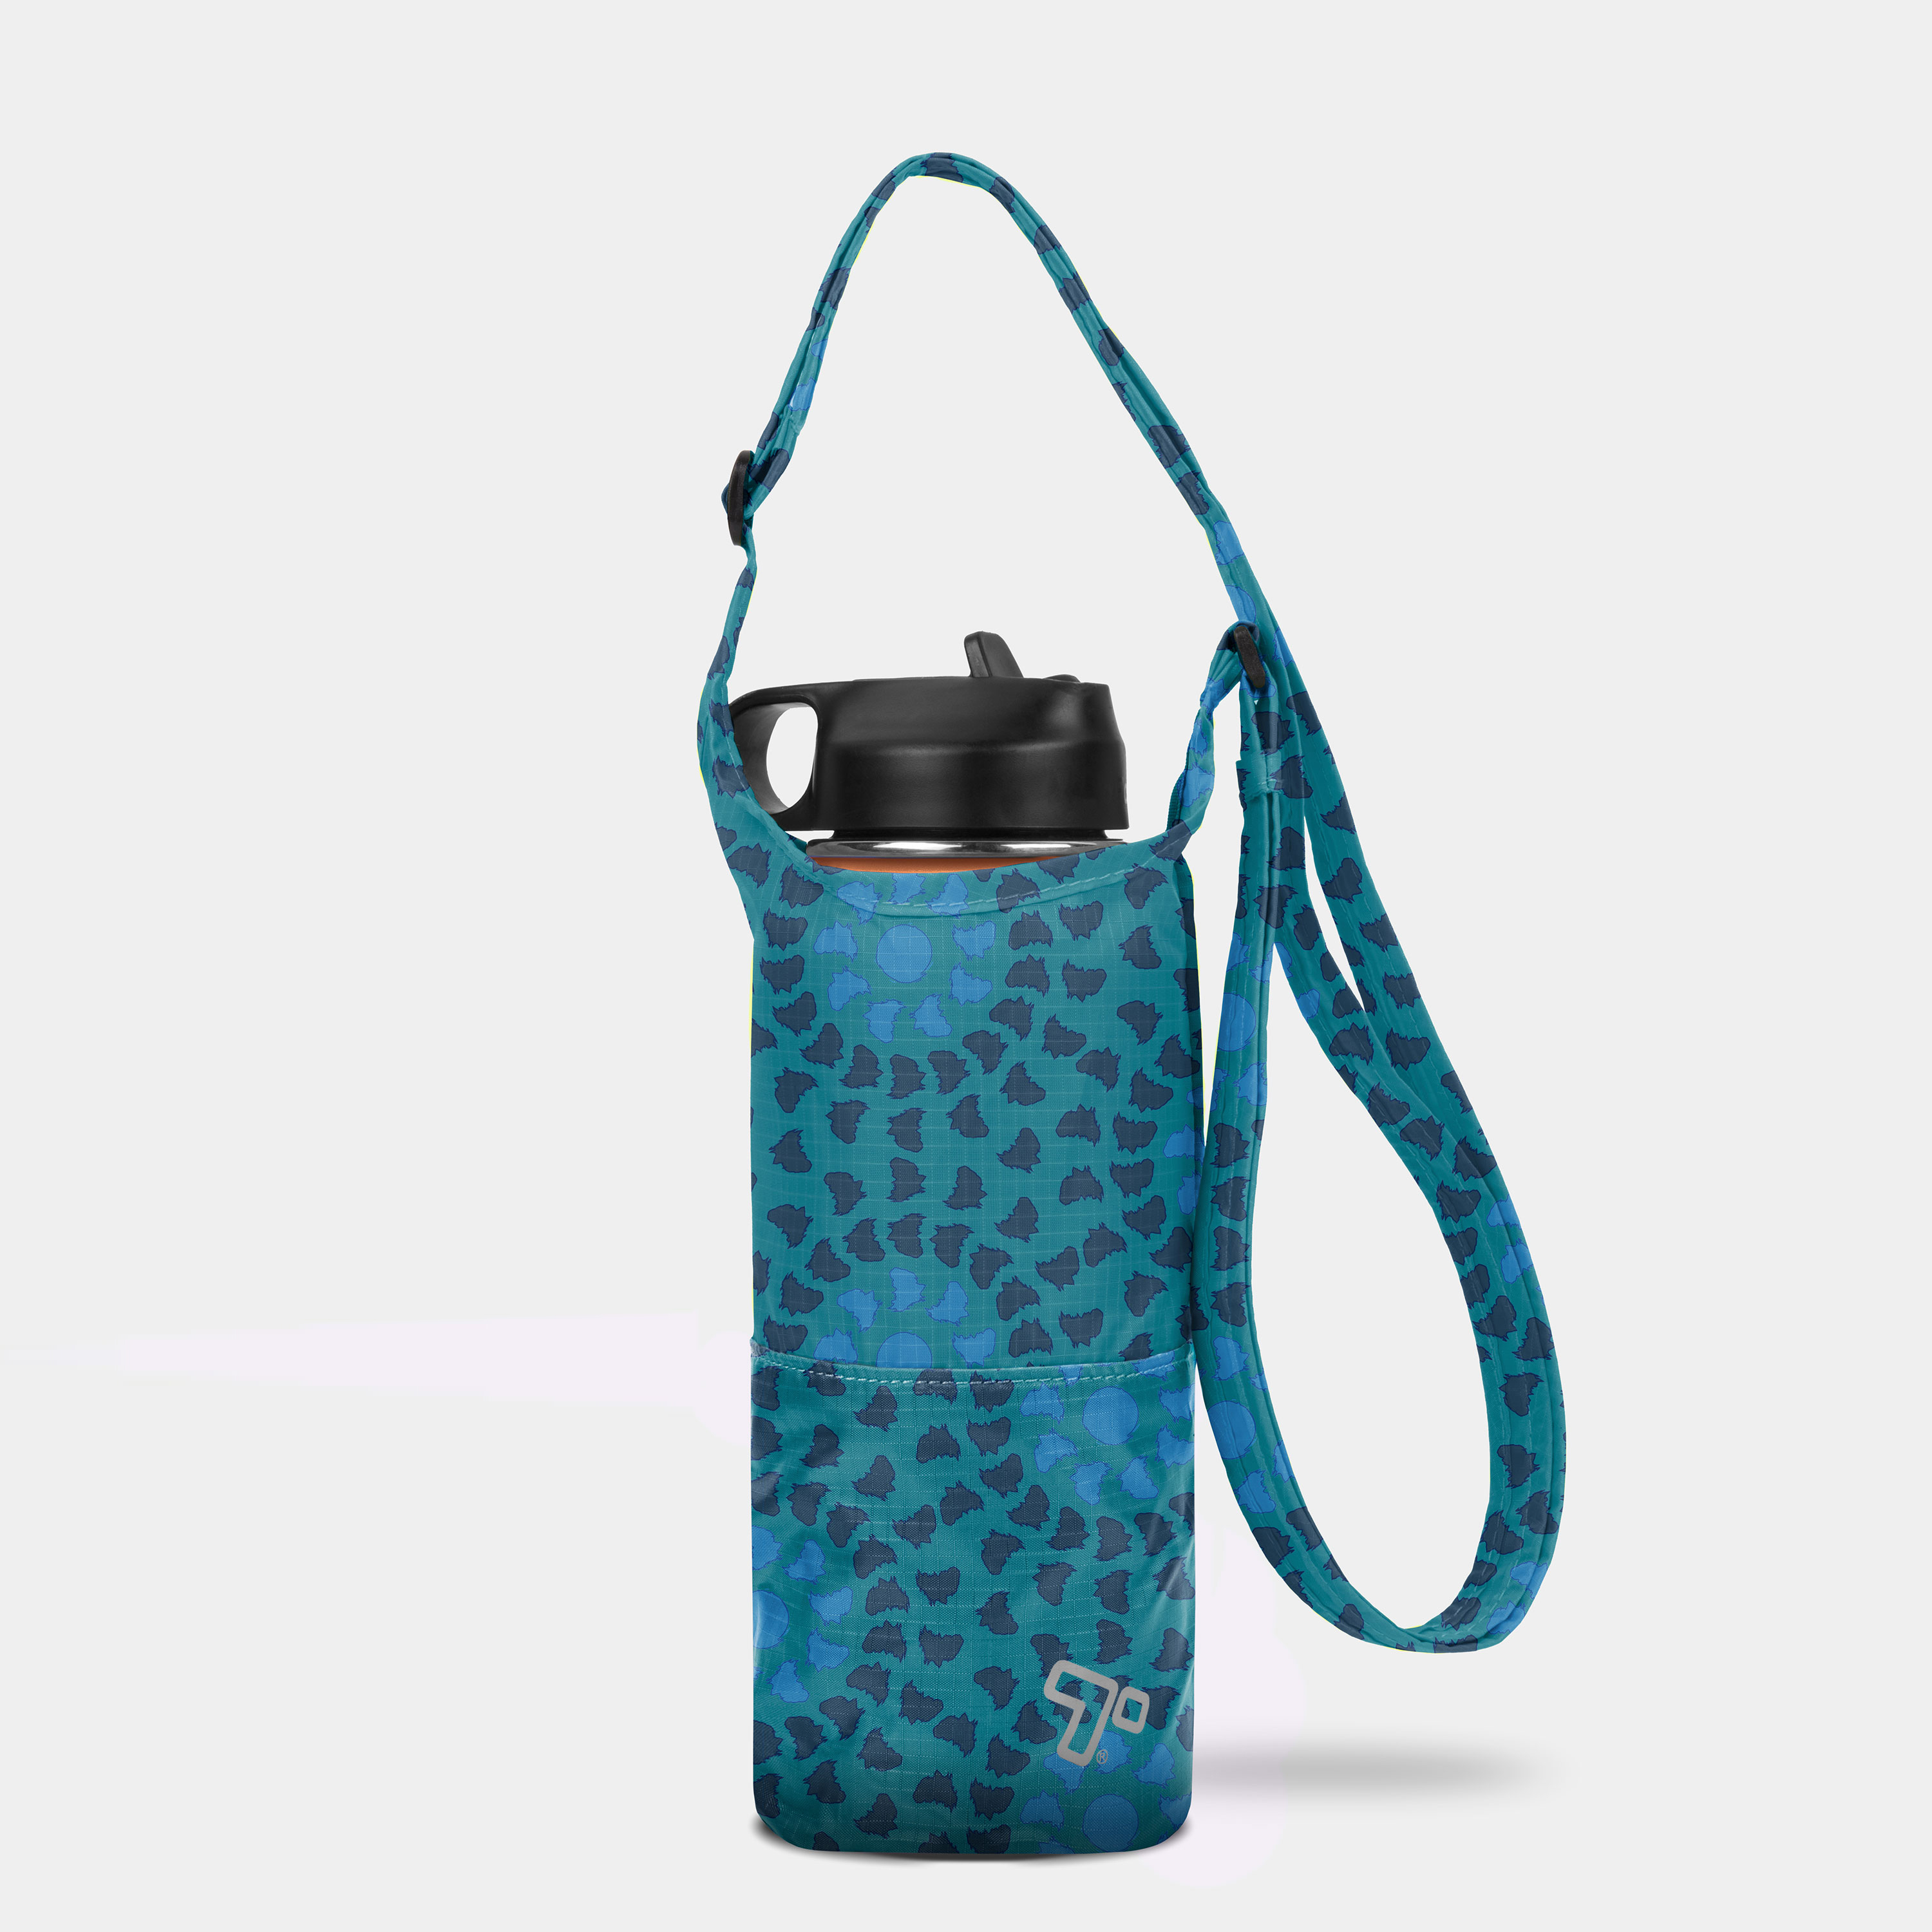 Packable Water Bottle Tote Carrier Bag Tumbler Cup Holder Pouch